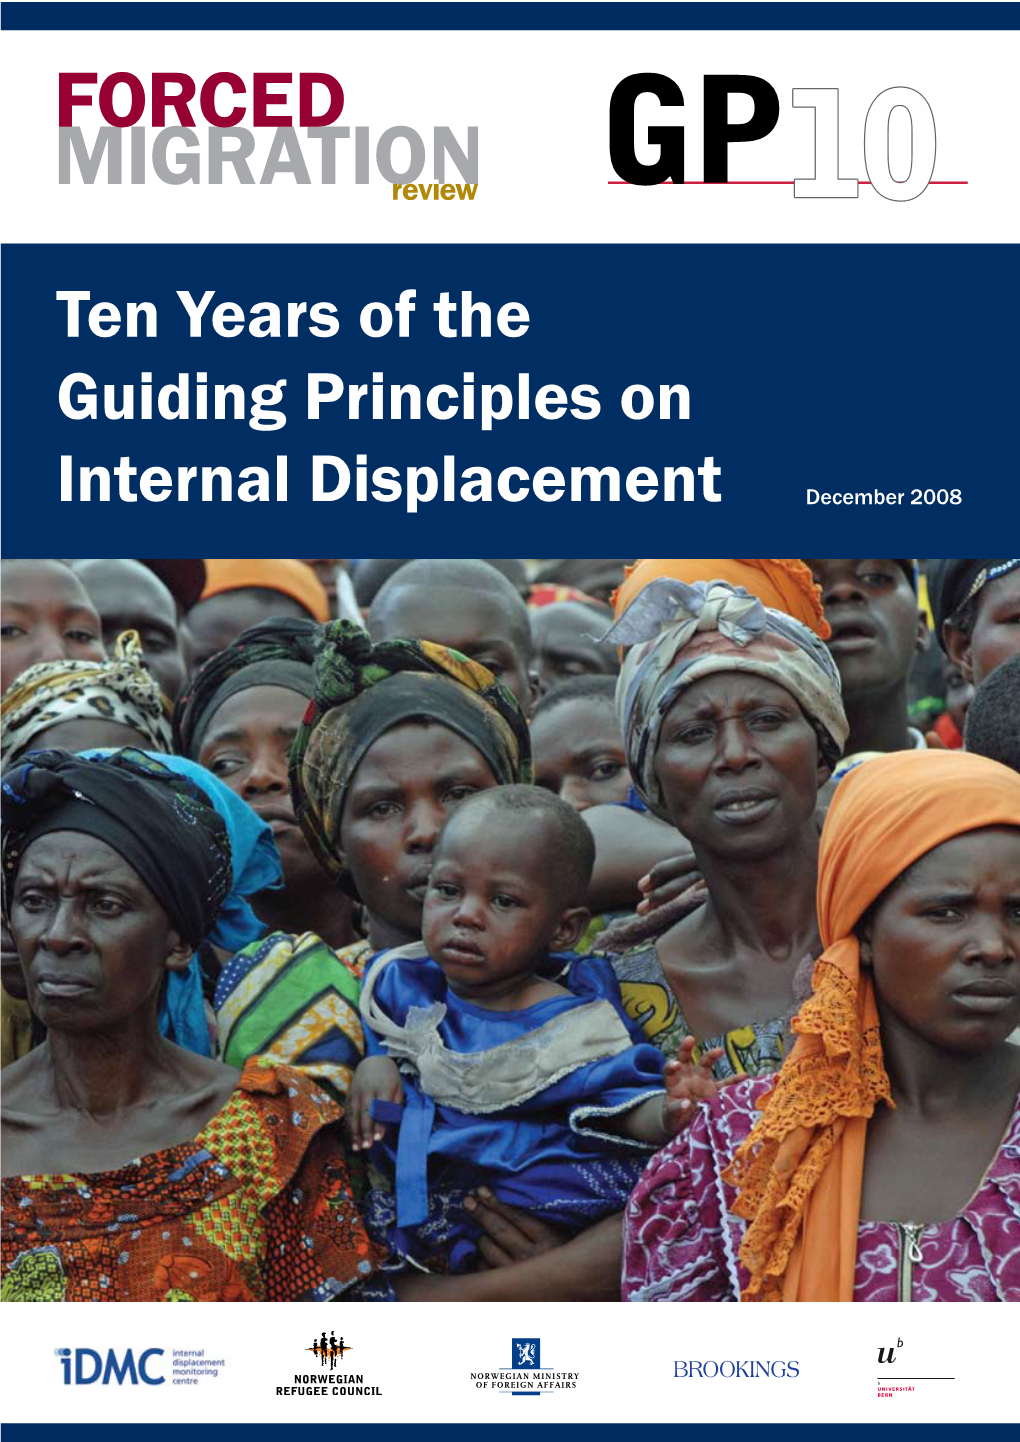 Ten Years of the Guiding Principles on Internal Displacement